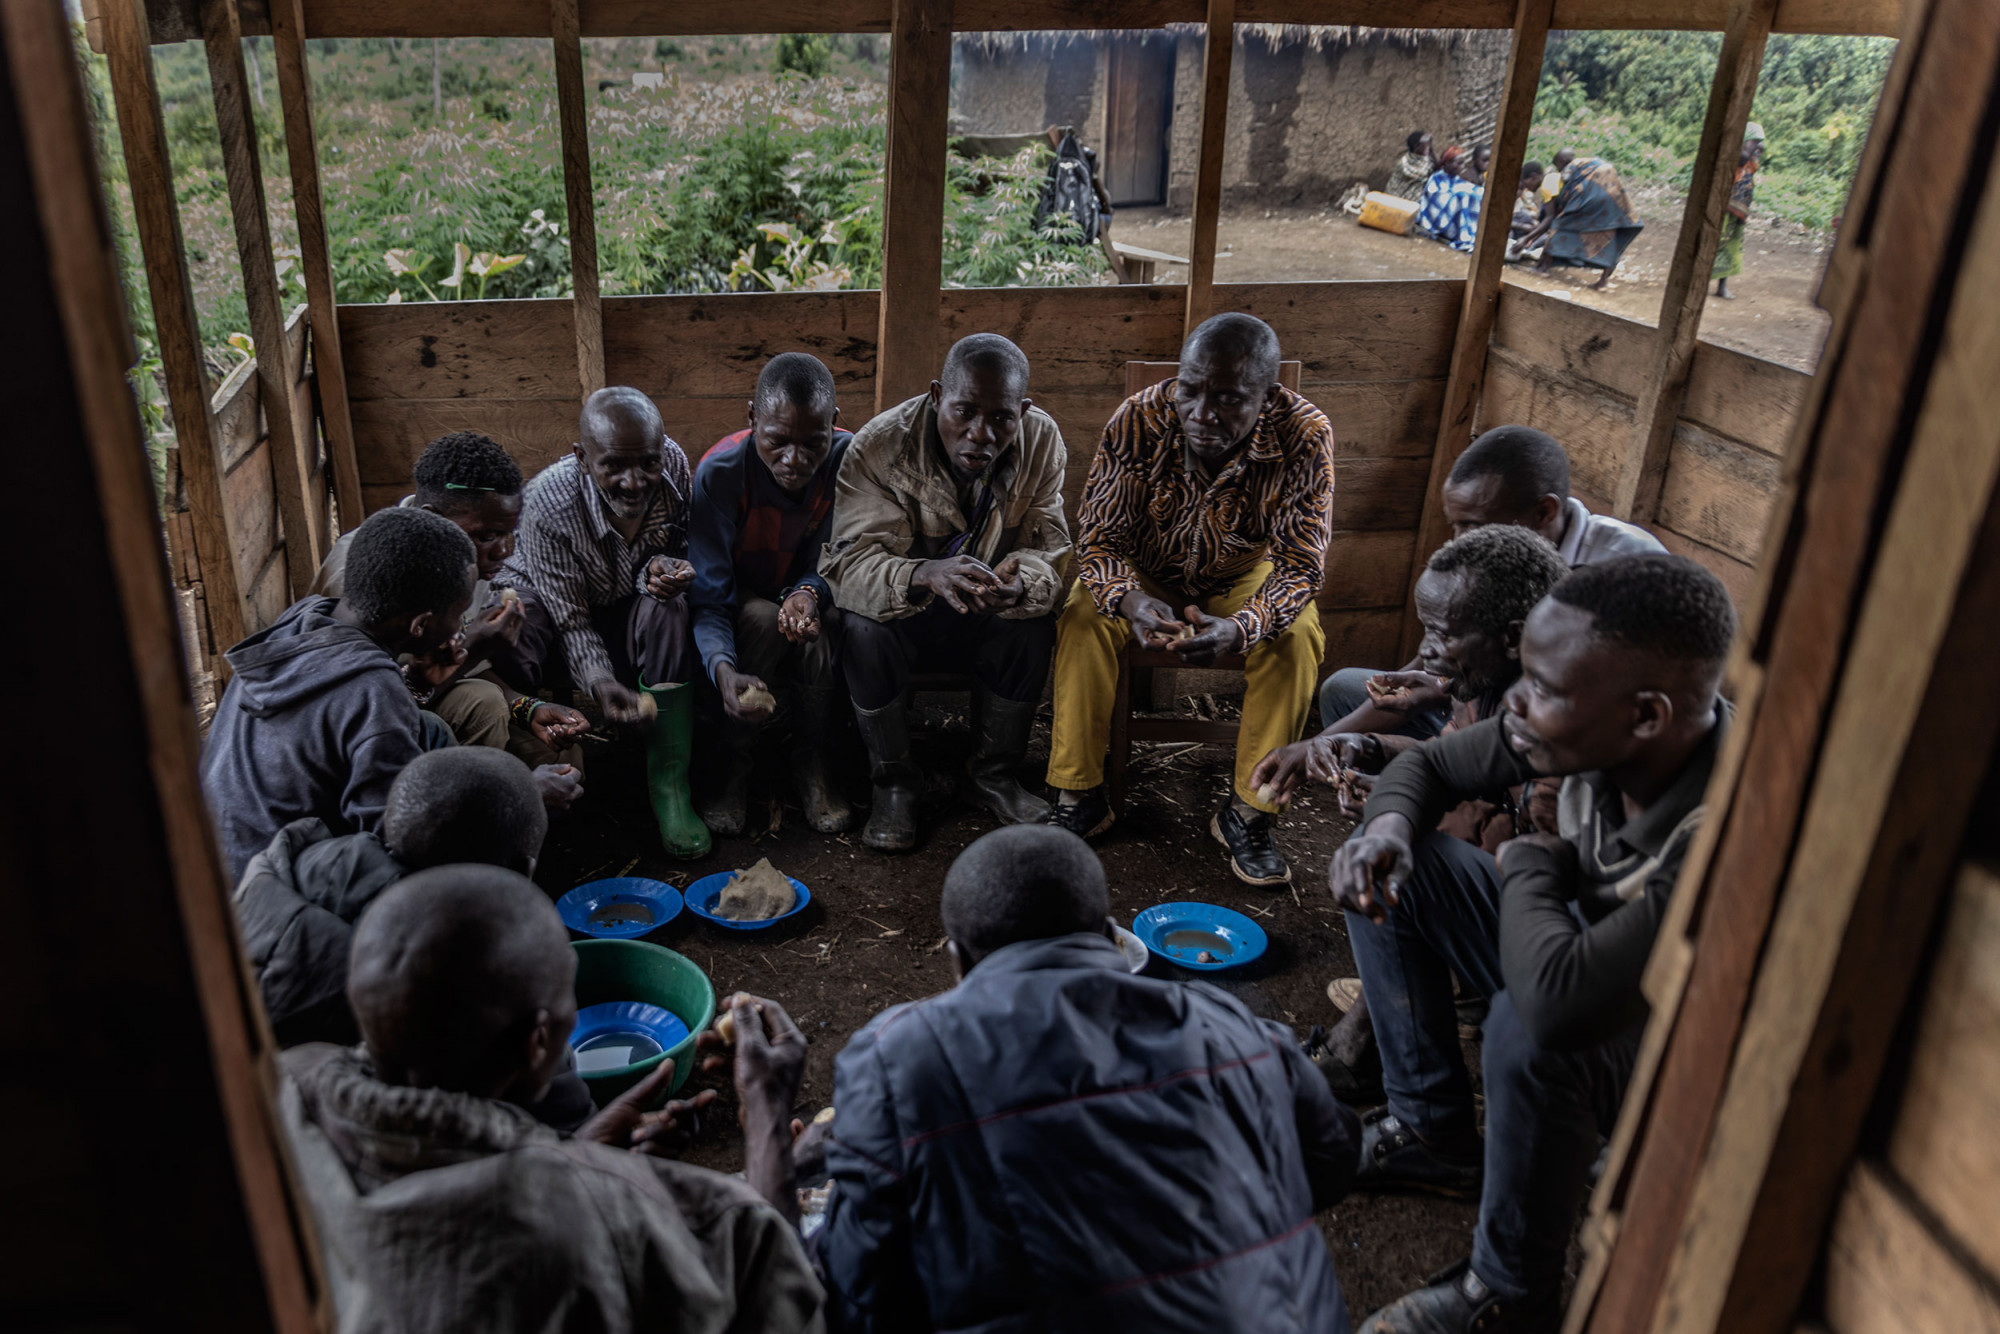 Bugamanda, Kahuzi-Biega National Park, September 03, 2021.  The elders of the Batwa community in a meeting to review the state of their village with the village chief. © Guerchom Ndebo for Fondation Carmignac